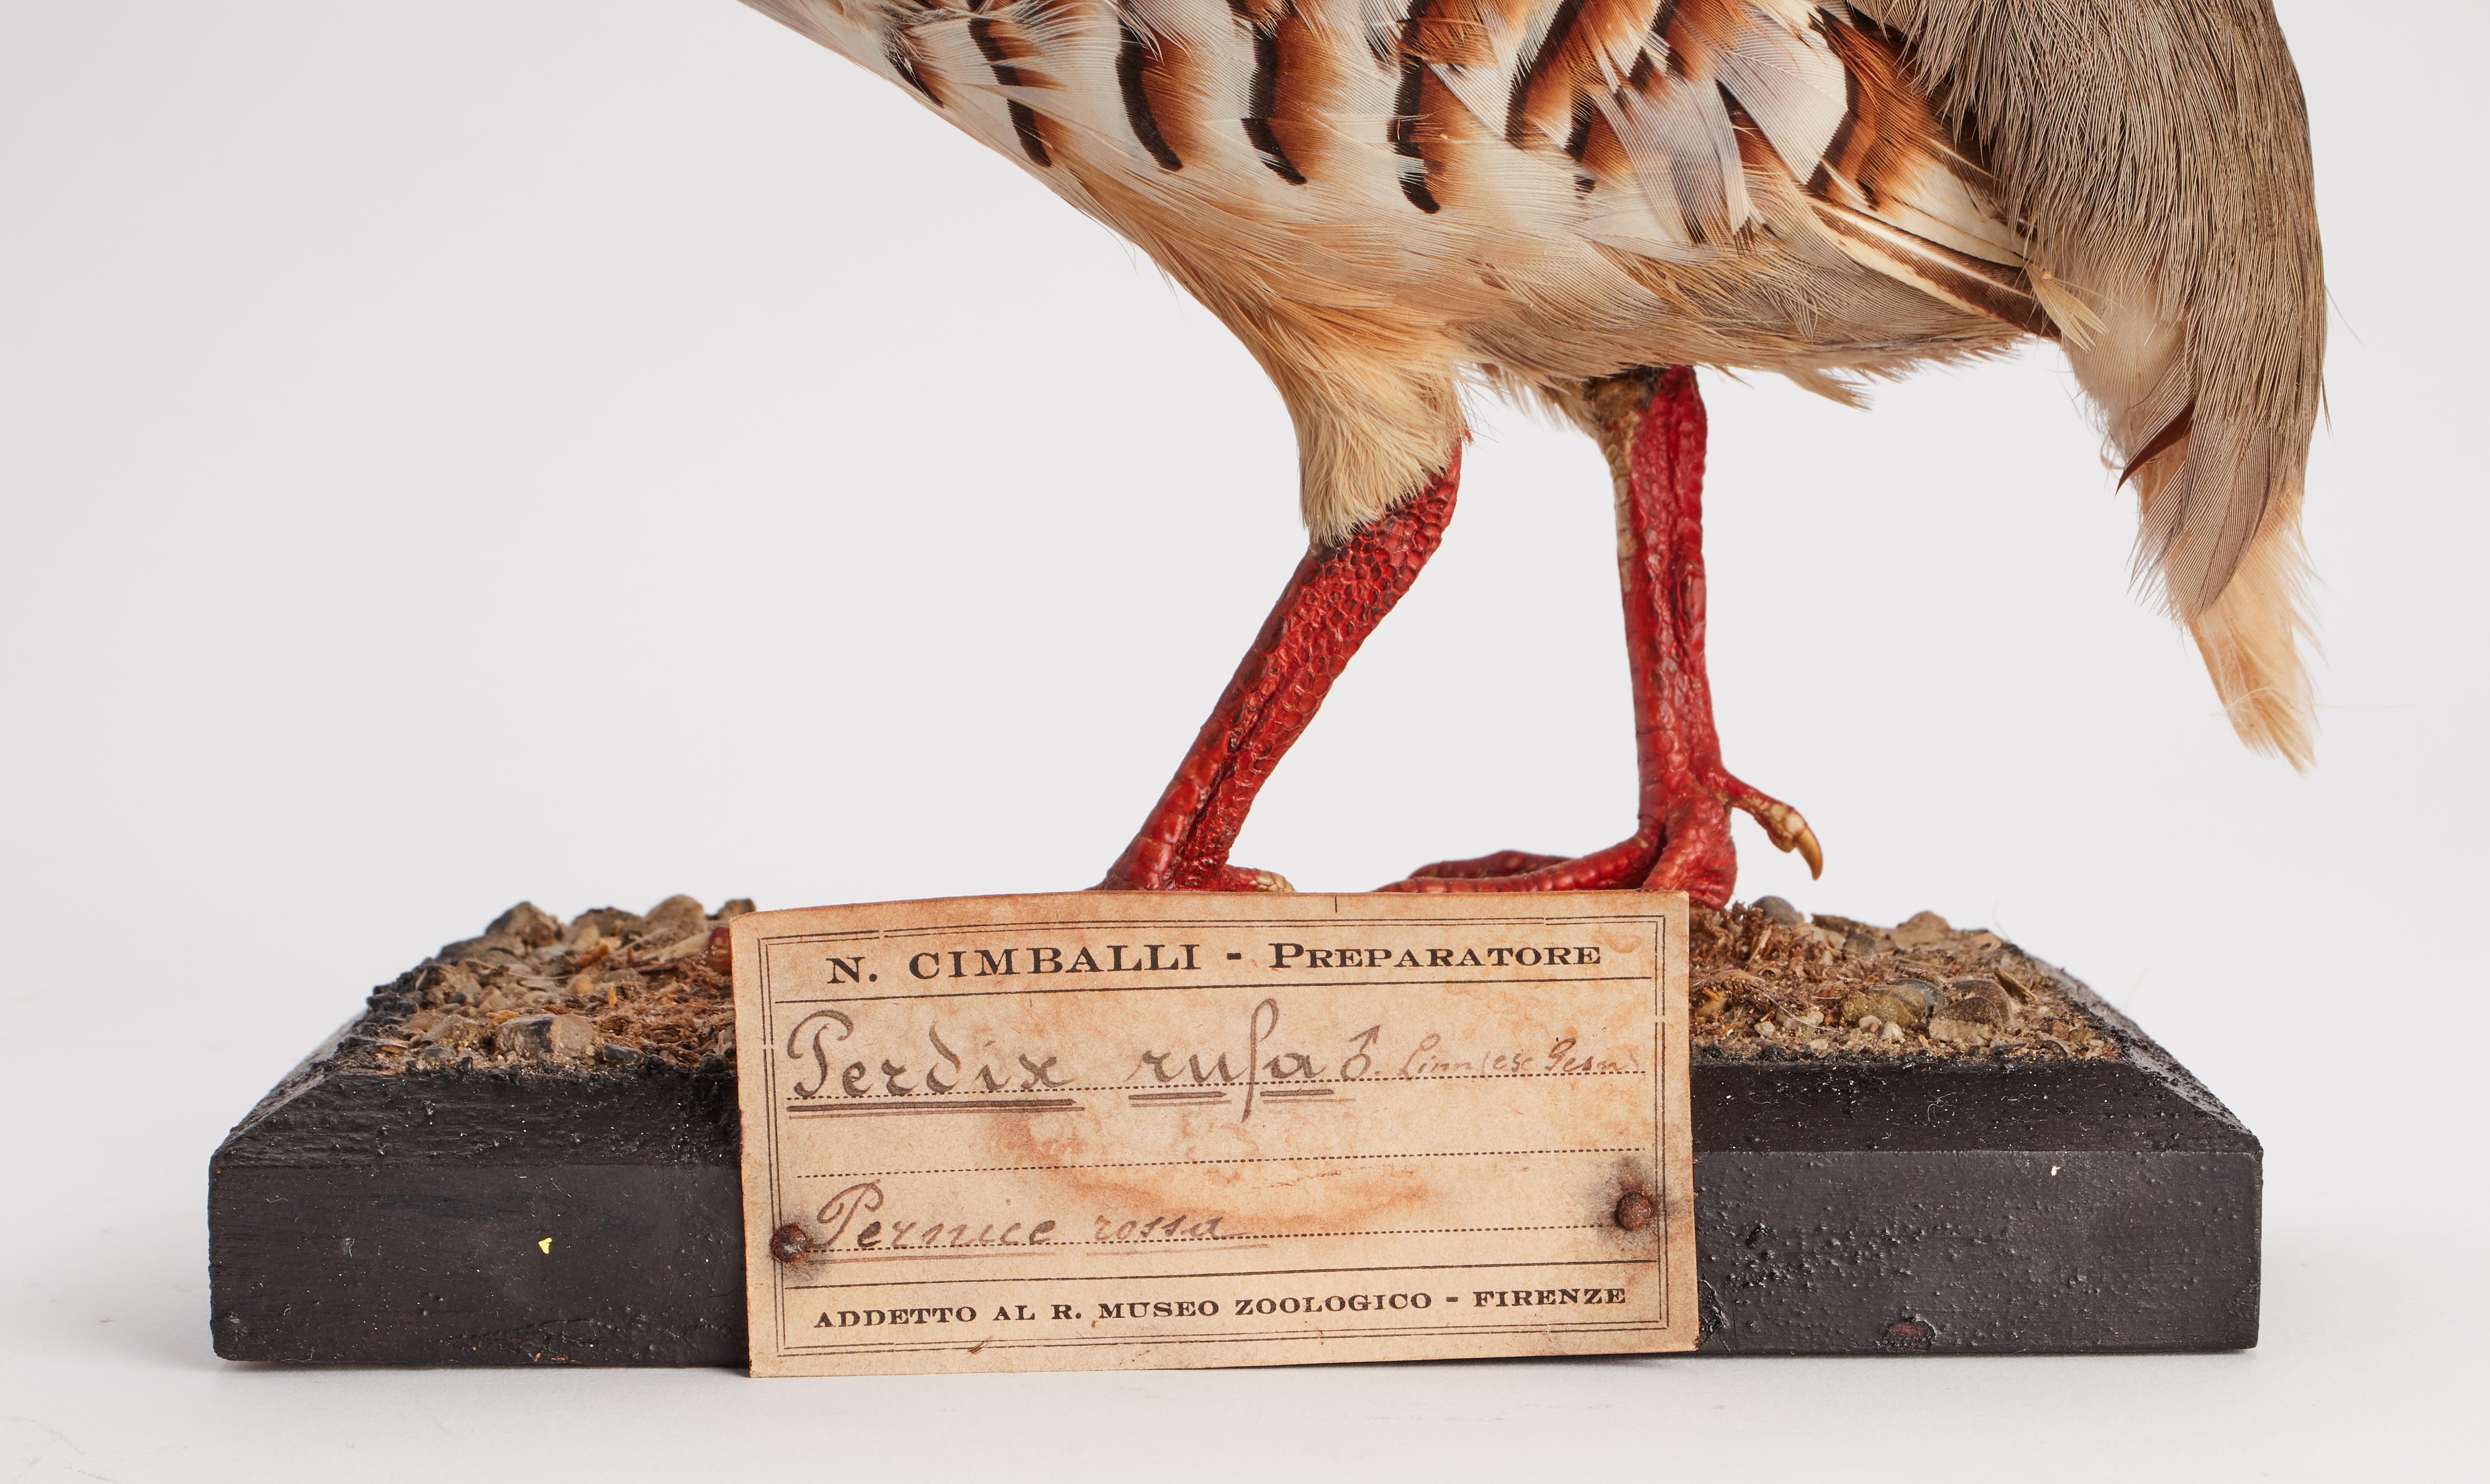 Natural specimen from Wunderkammer Stuffed bird (Perdix Rufa) Red Partridge mounted on a wooden base with cartouche Specimen for laboratory and Natural history cabinet. S. Brogi Naturalista. Siena, Italy 1880 ca.